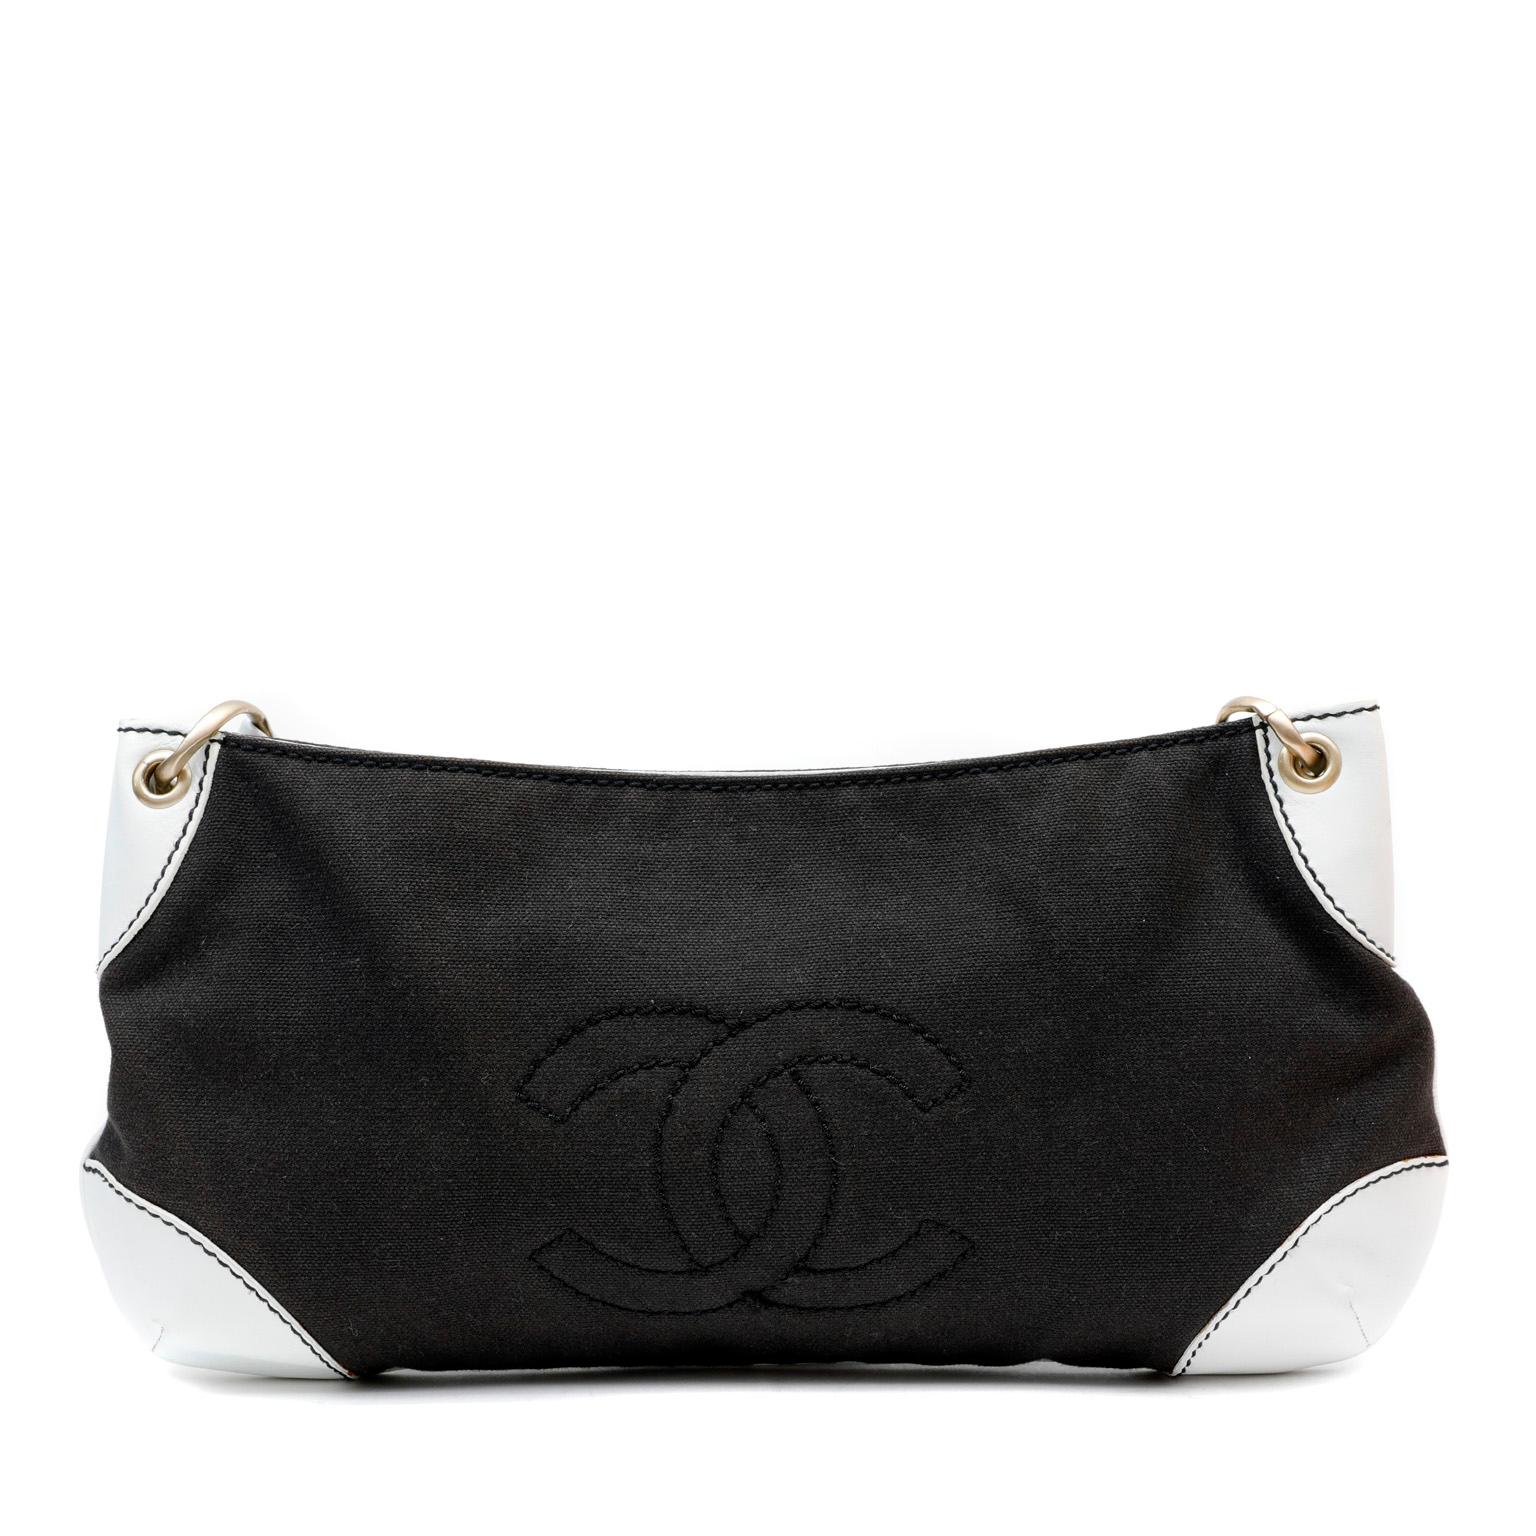 This authentic Chanel Black Canvas Shoulder Bag is in very good condition.  Black canvas with tonally stitched interlocking CC and white leather reinforced corners.  Substantial white leather single strap is interwoven with matte gold linked chain. 